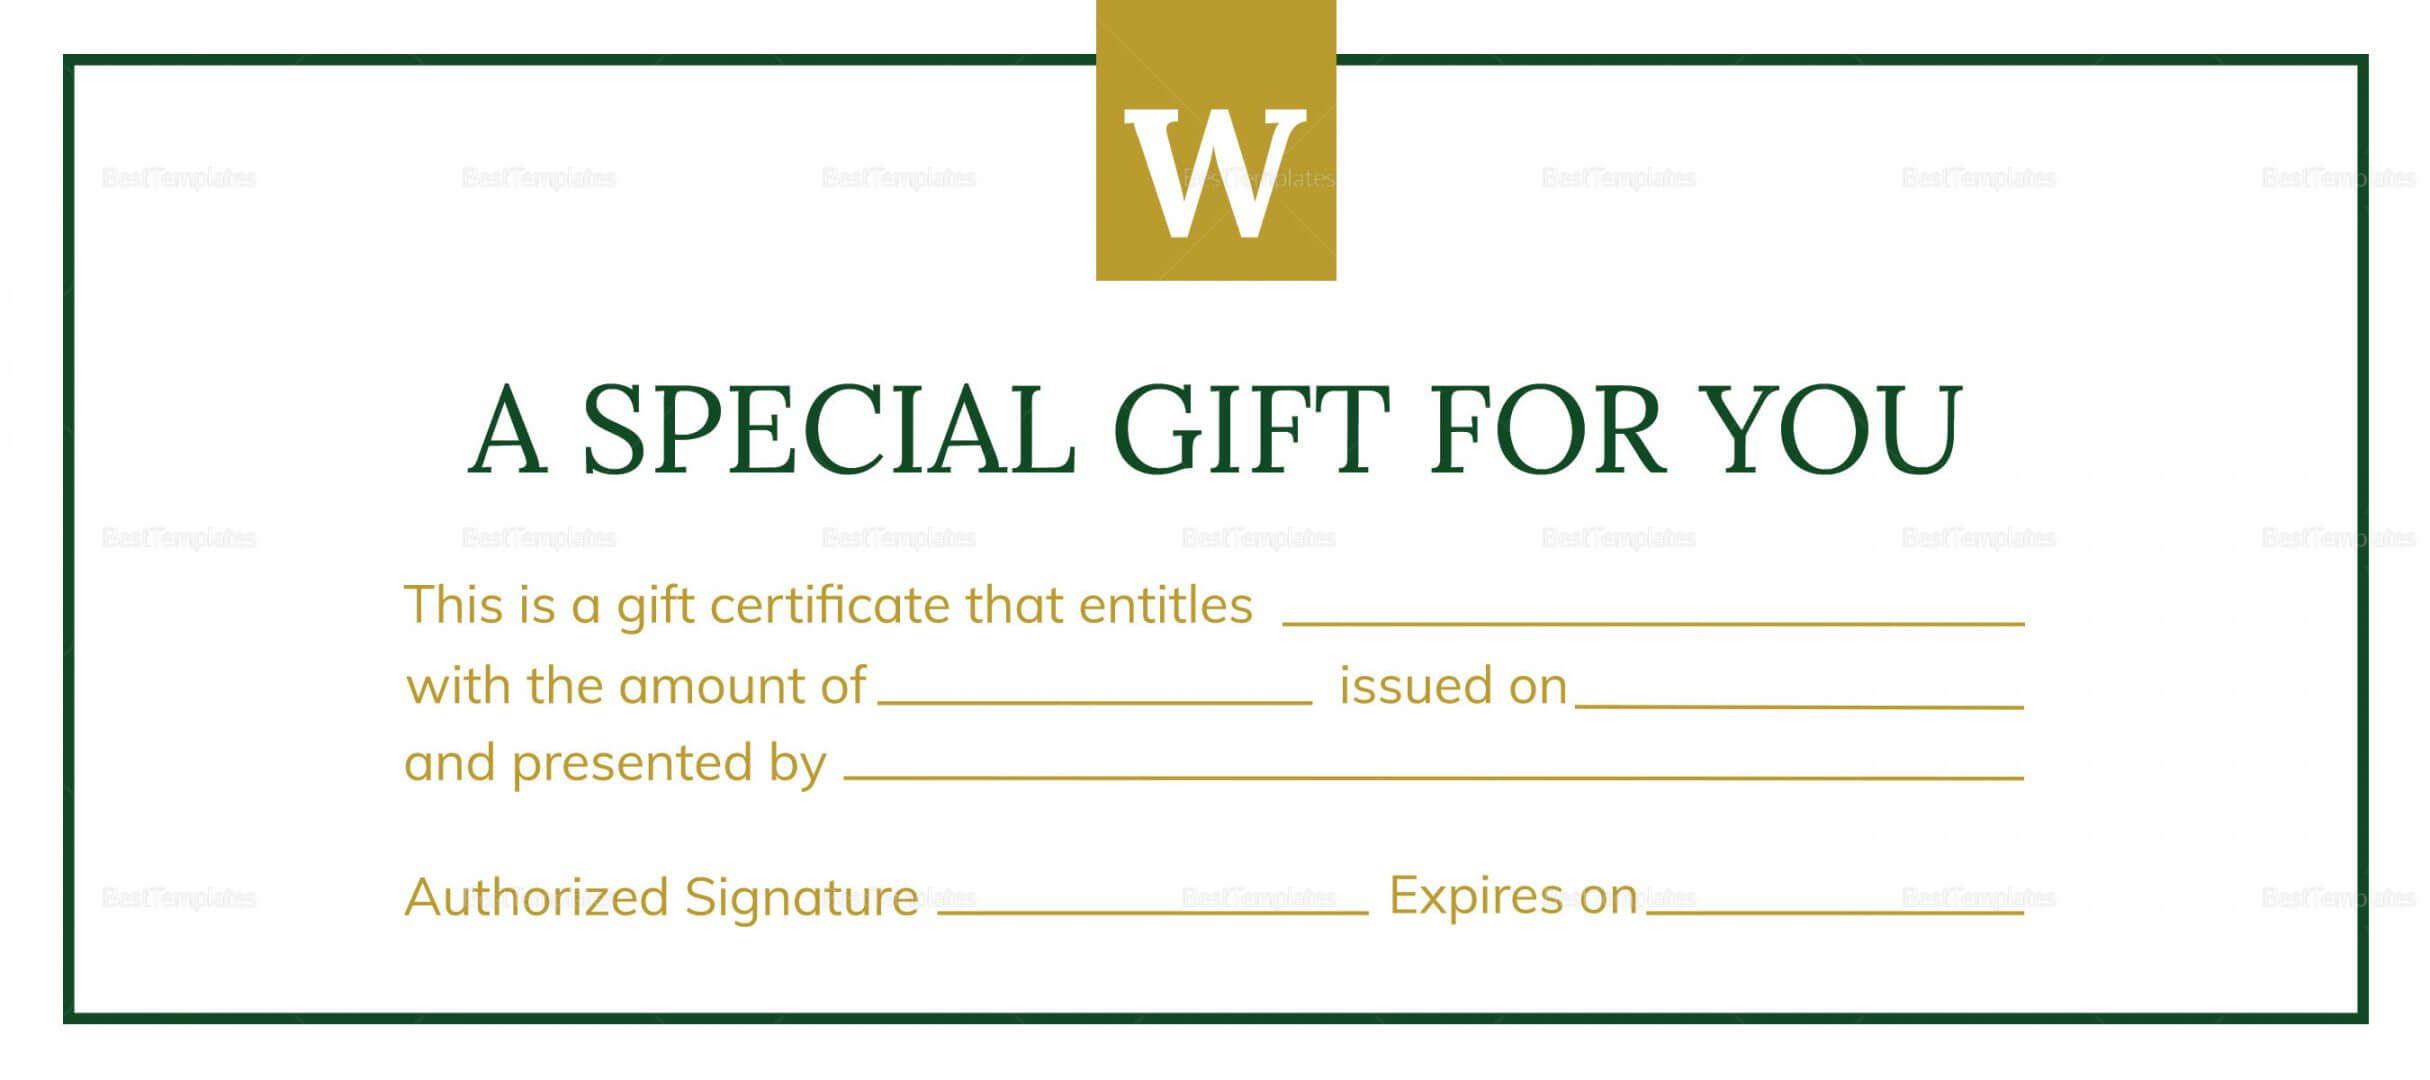 Hotel Gift Certificate Template Inside This Entitles The Bearer To Template Certificate